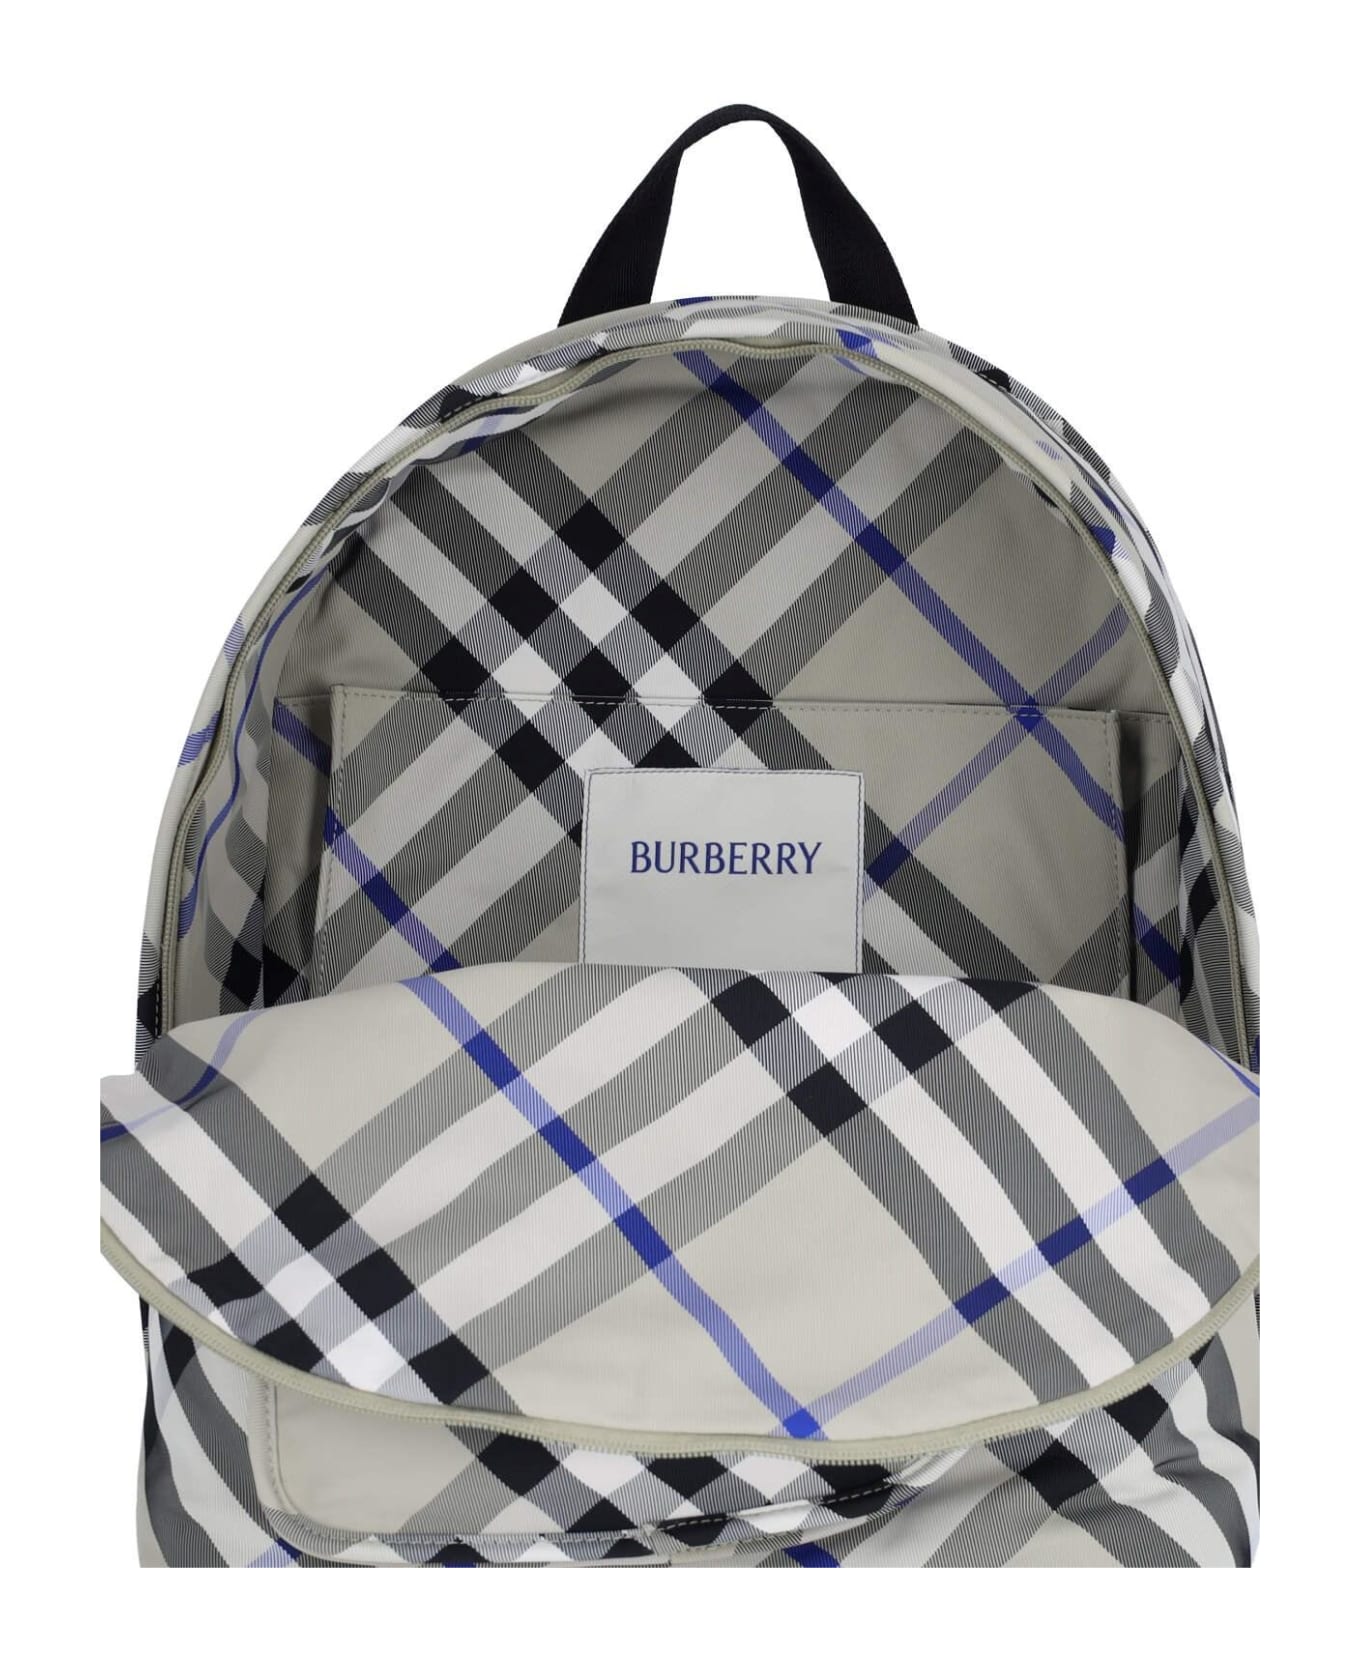 Burberry 'shield' Backpack - Lichen